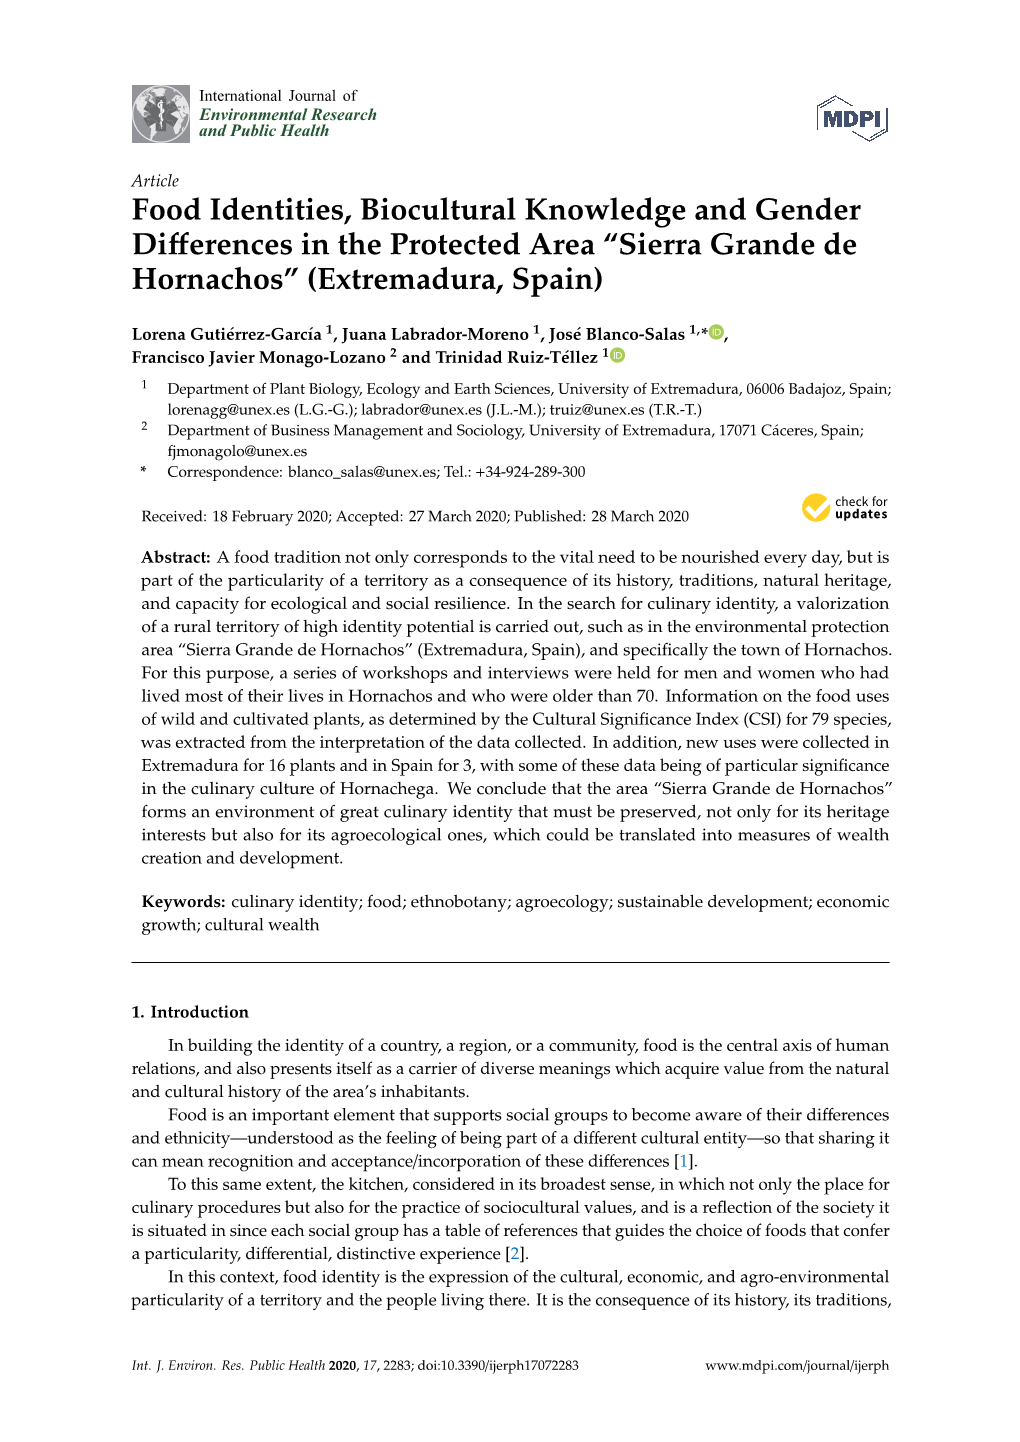 Food Identities, Biocultural Knowledge and Gender Diﬀerences in the Protected Area “Sierra Grande De Hornachos” (Extremadura, Spain)